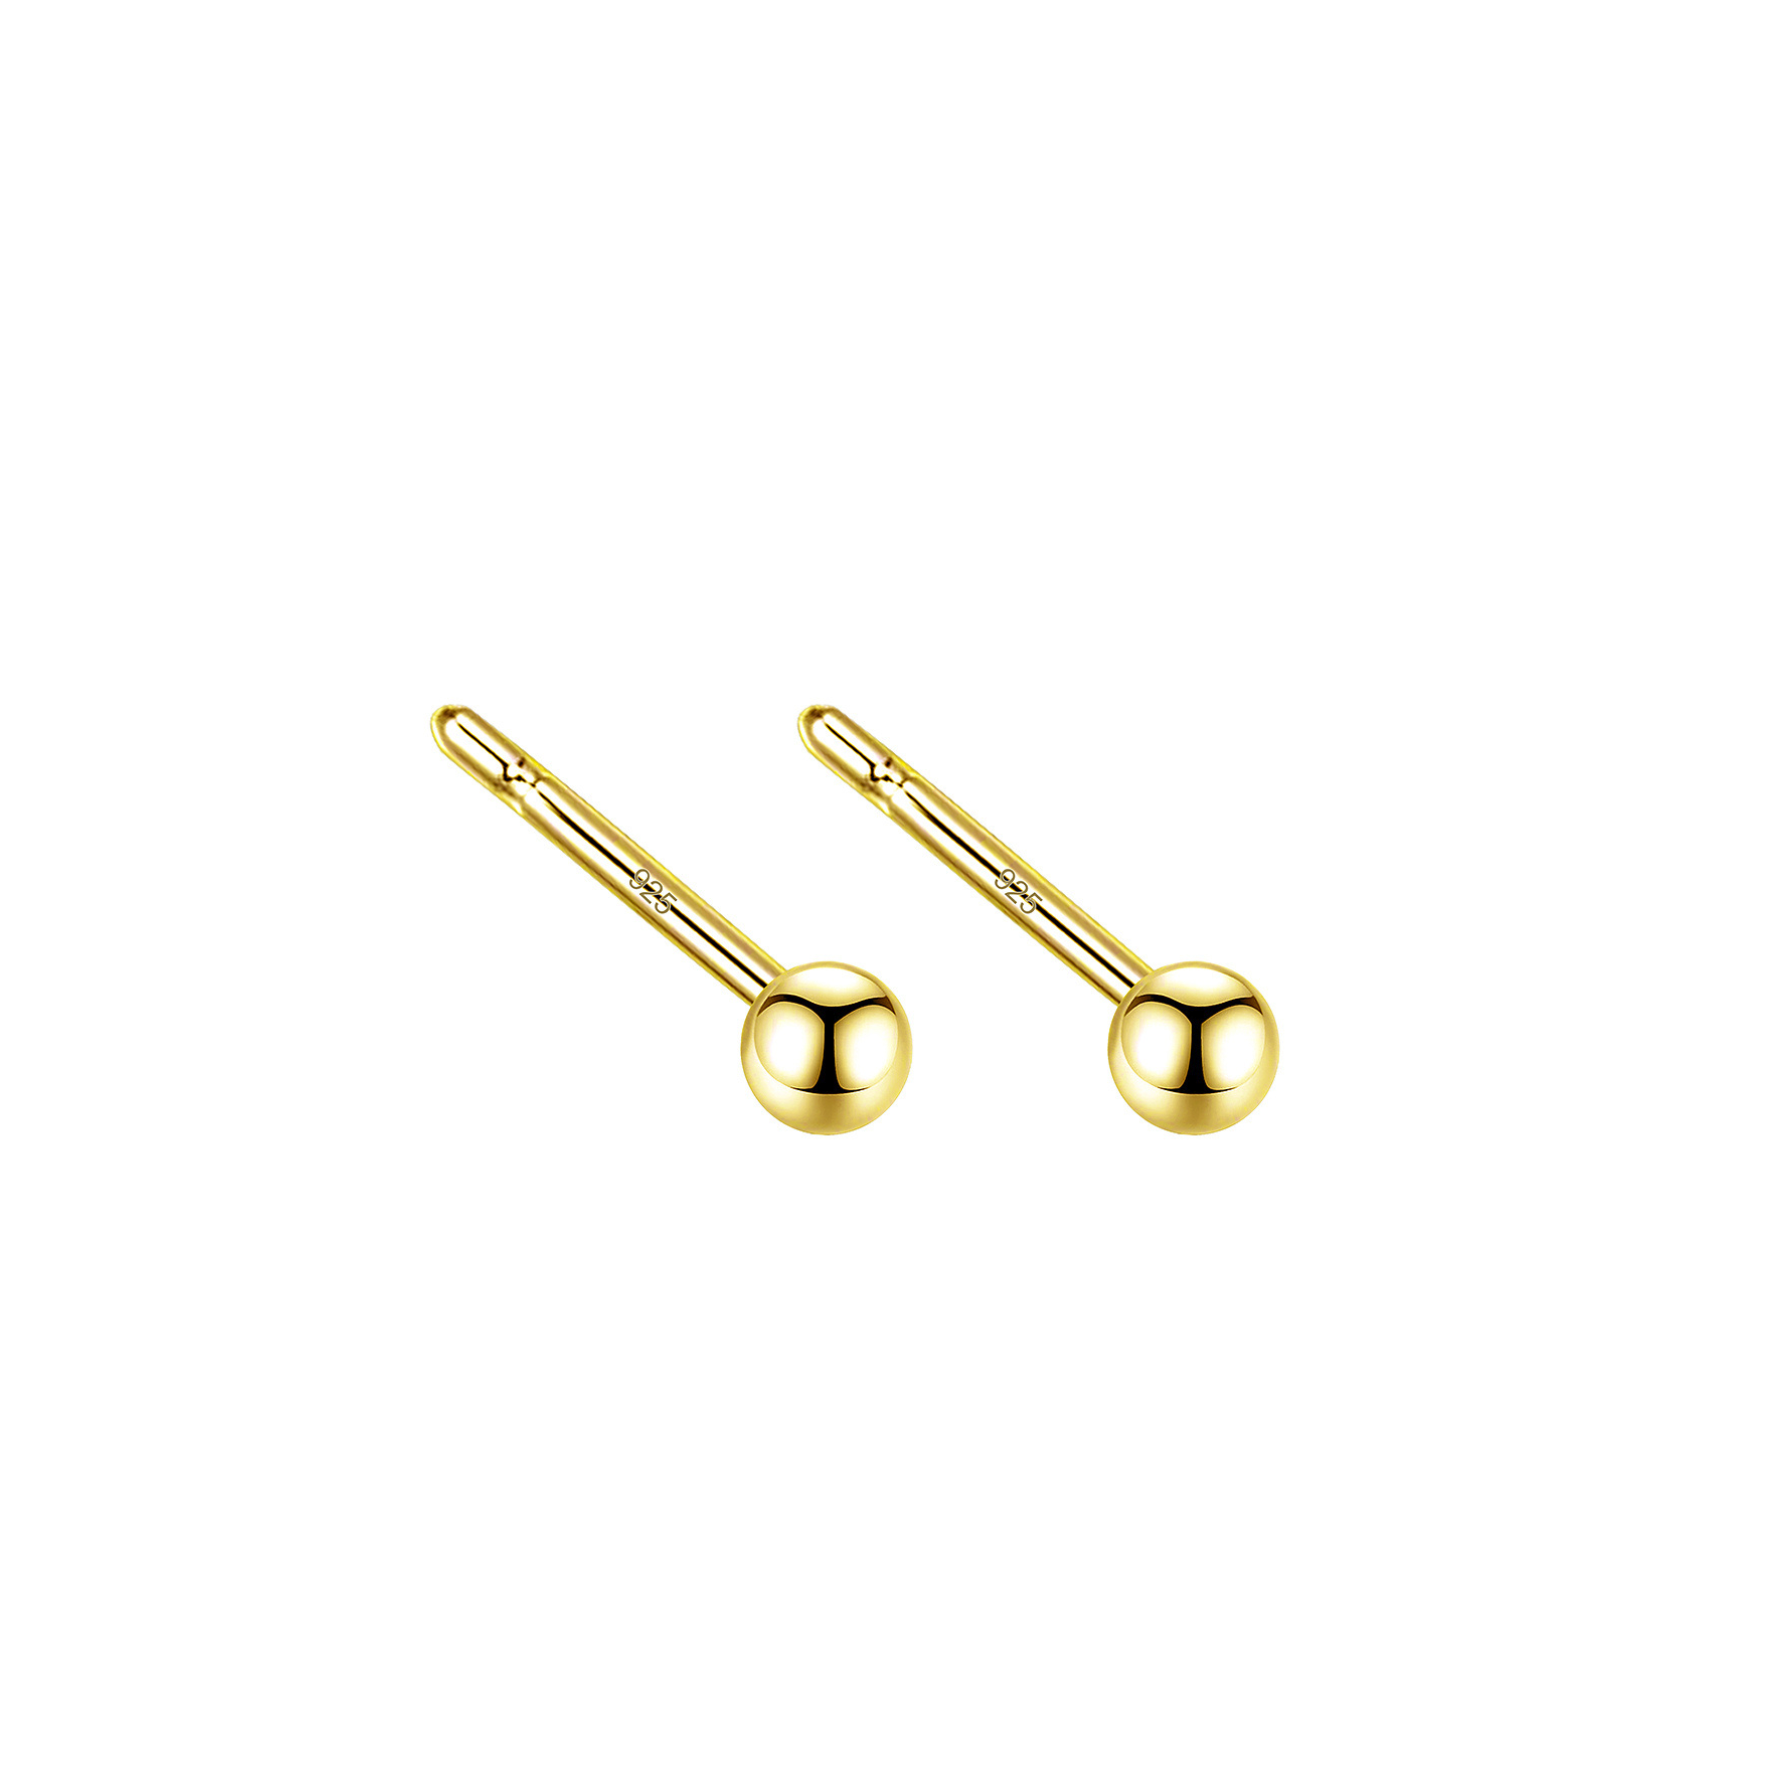 Noell Beads Studs from A-Hjort Jewellery in Goldplated Silver Sterling 925